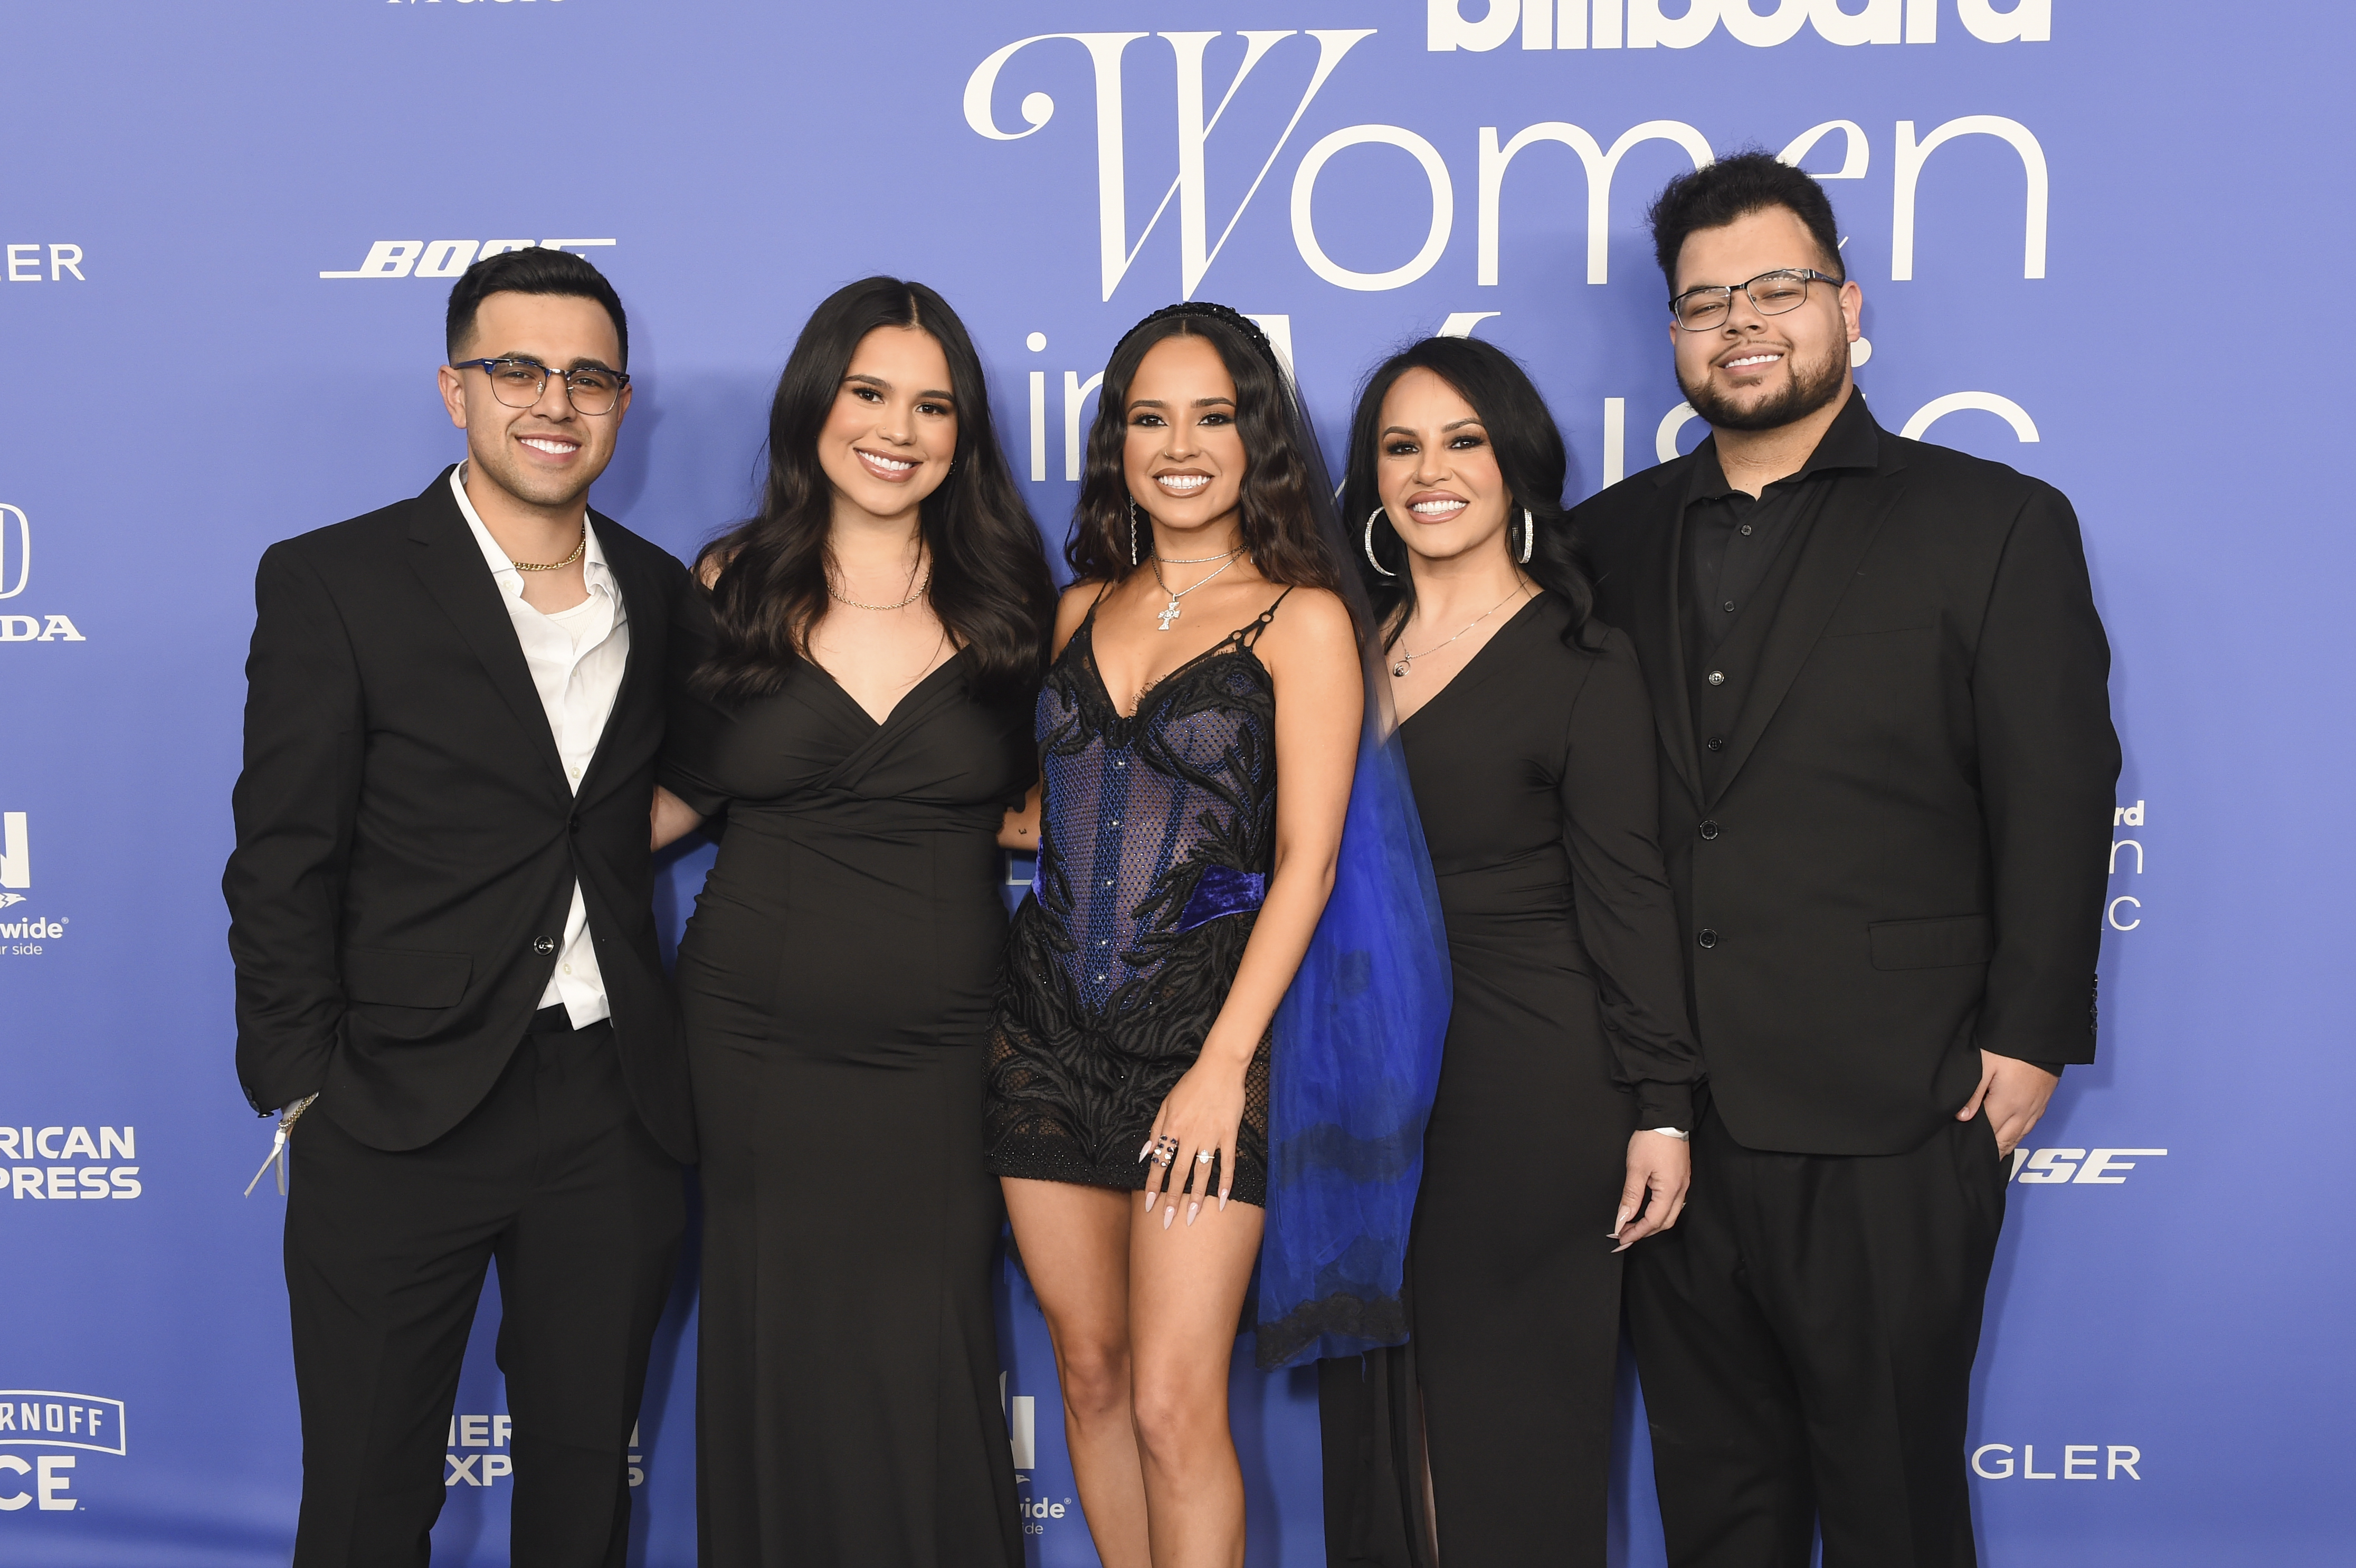 Becky G, Alex Gomez, and their family during the Billboard Women In Music event at YouTube Theater on March 1, 2023, in Los Angeles, California. | Source: Getty Images